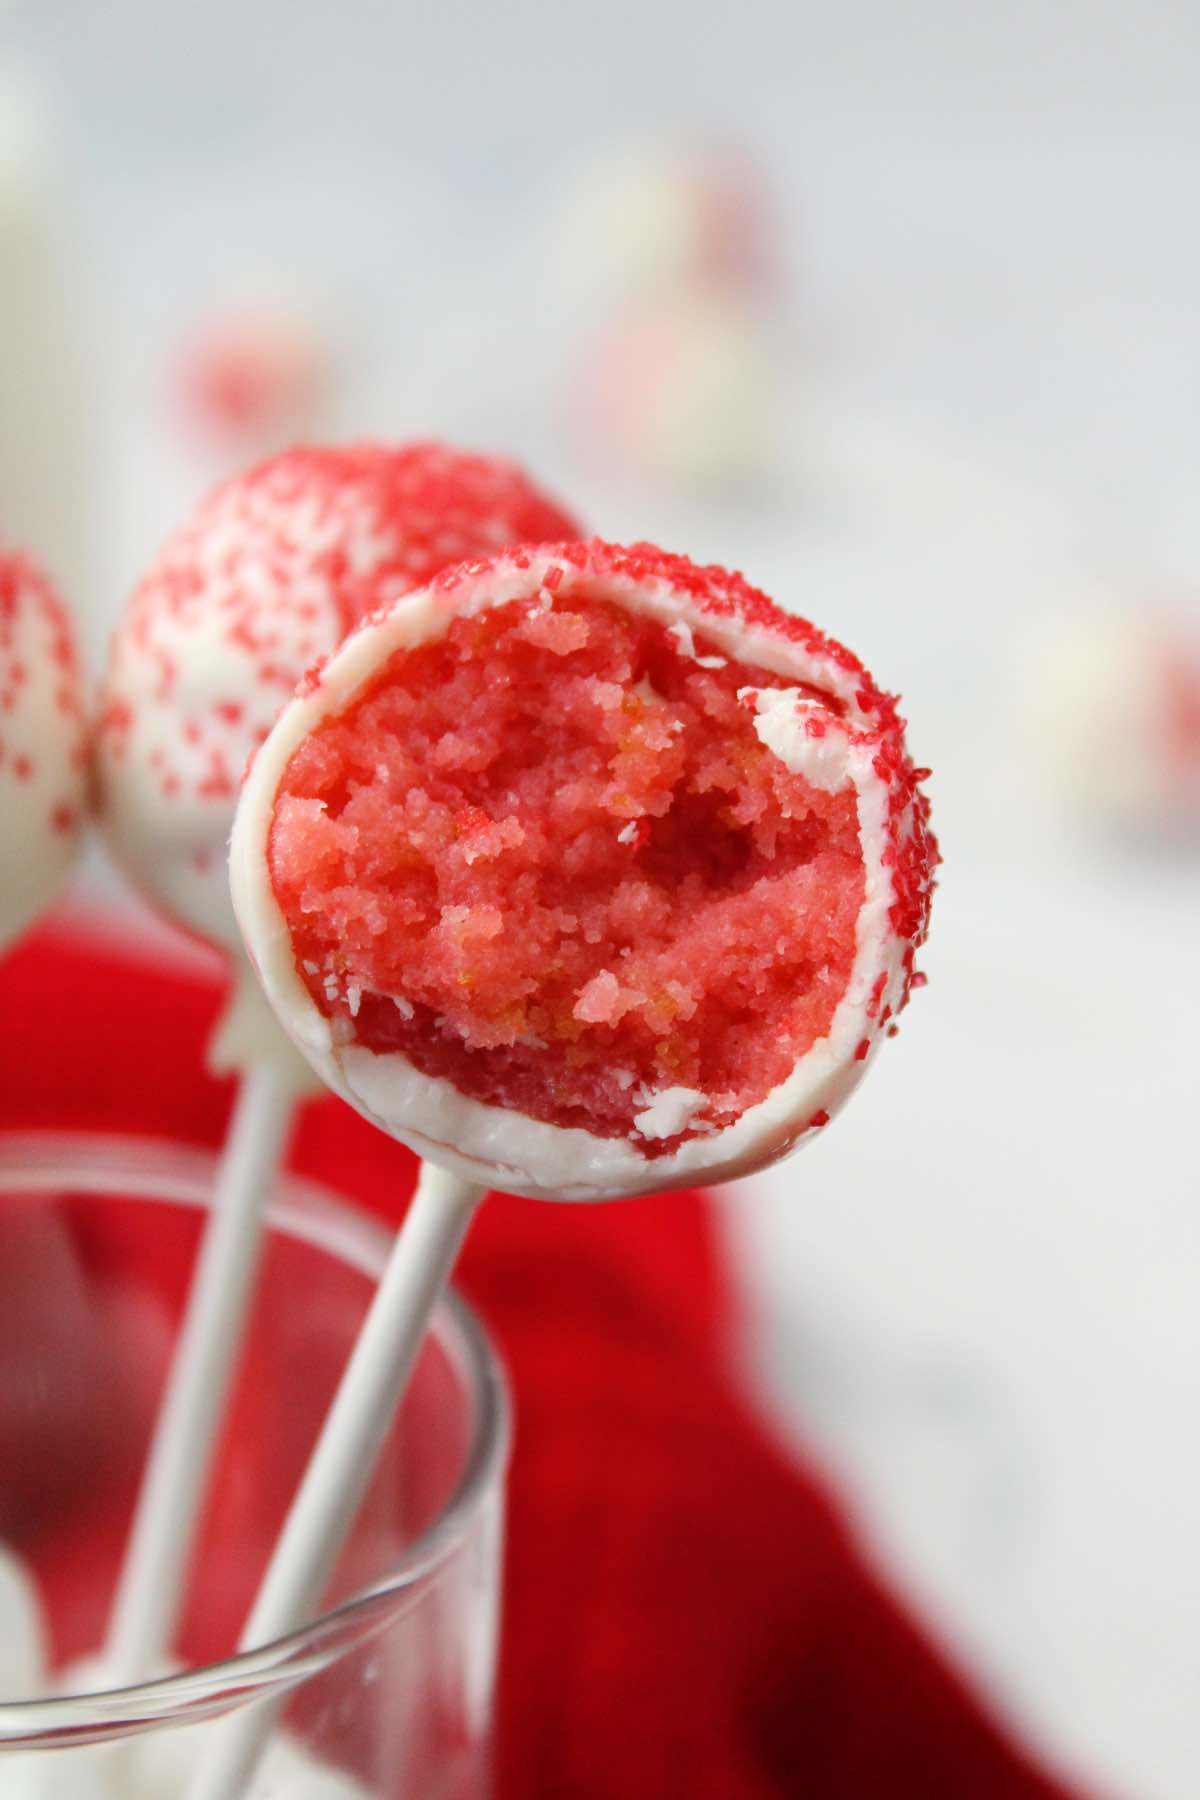 These strawberry cake balls taste like cheesecake because of the cream cheese frosting on the inside.